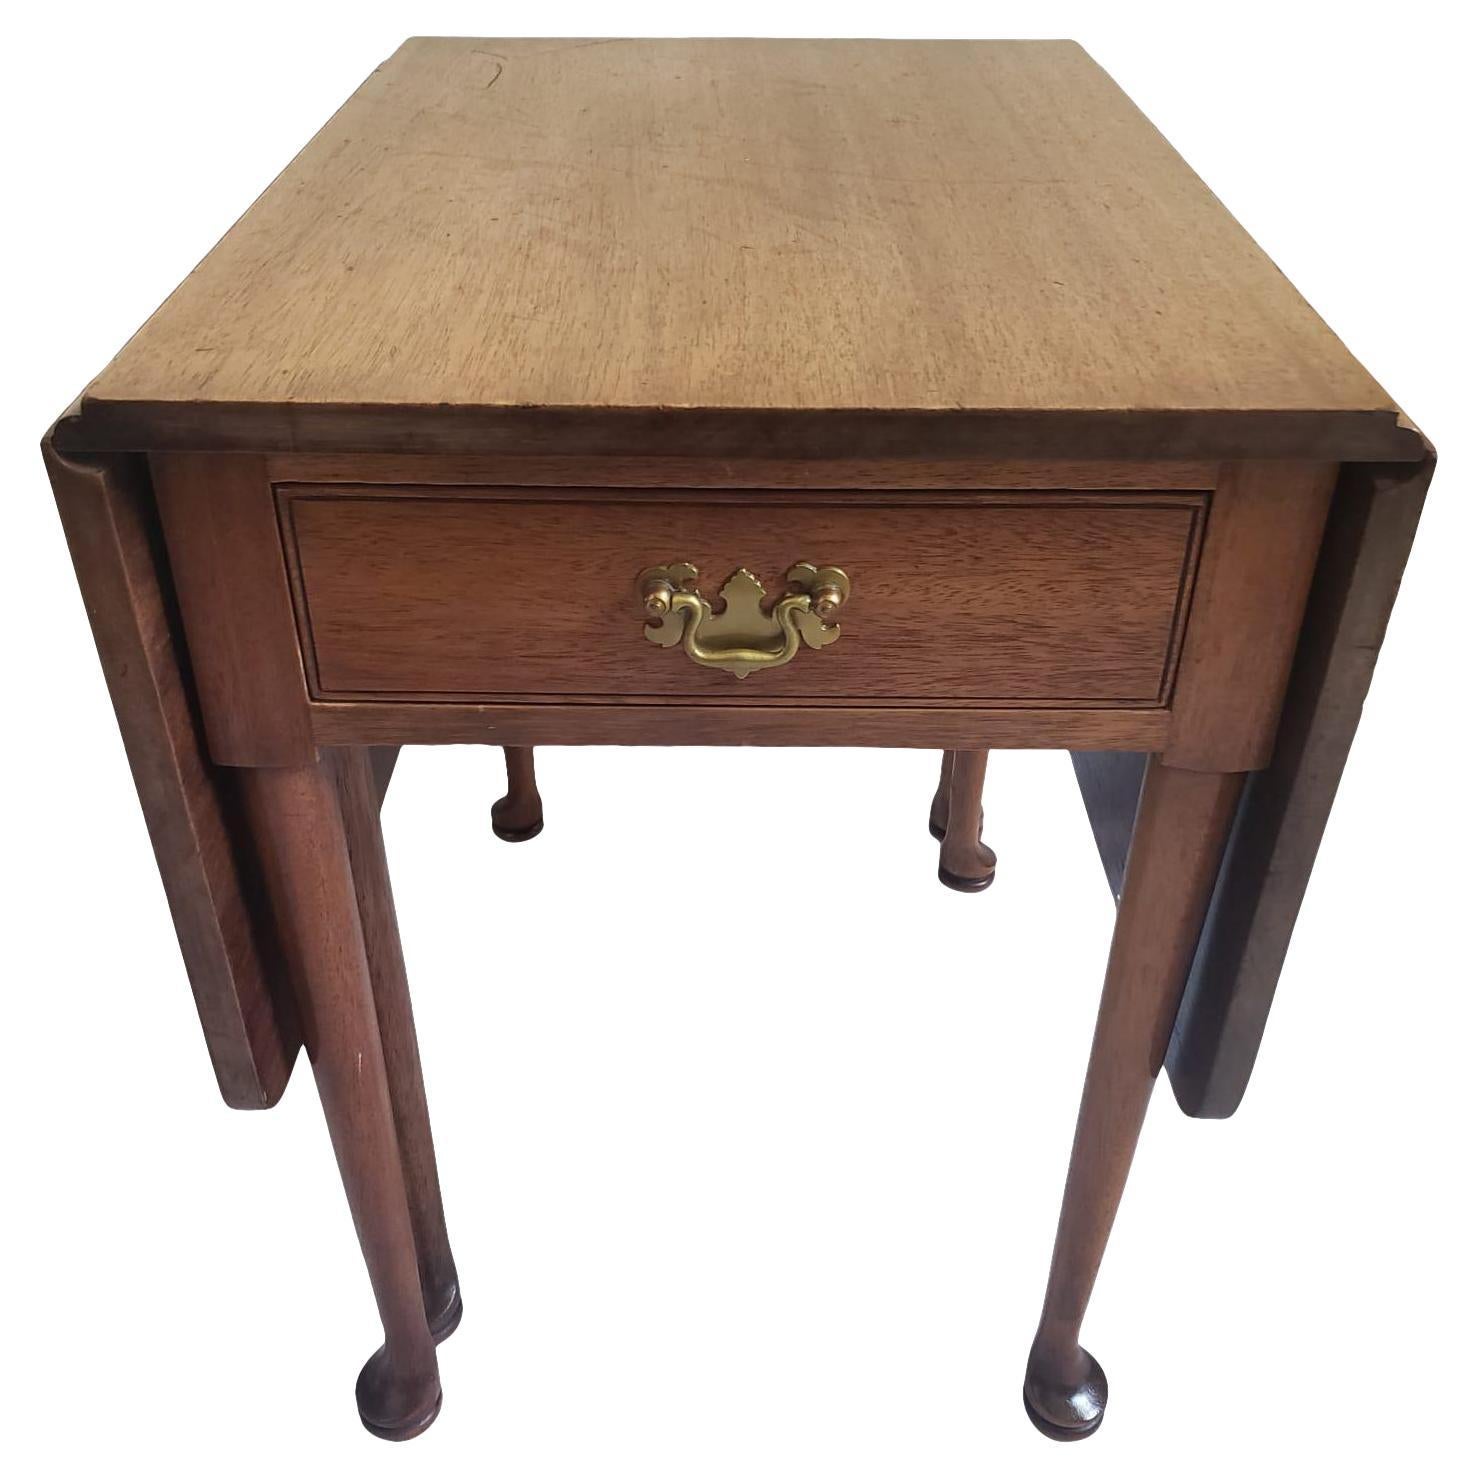 1940s Biggs Kittinger Chippendale Mahogany Drop Leaf Side Table For Sale